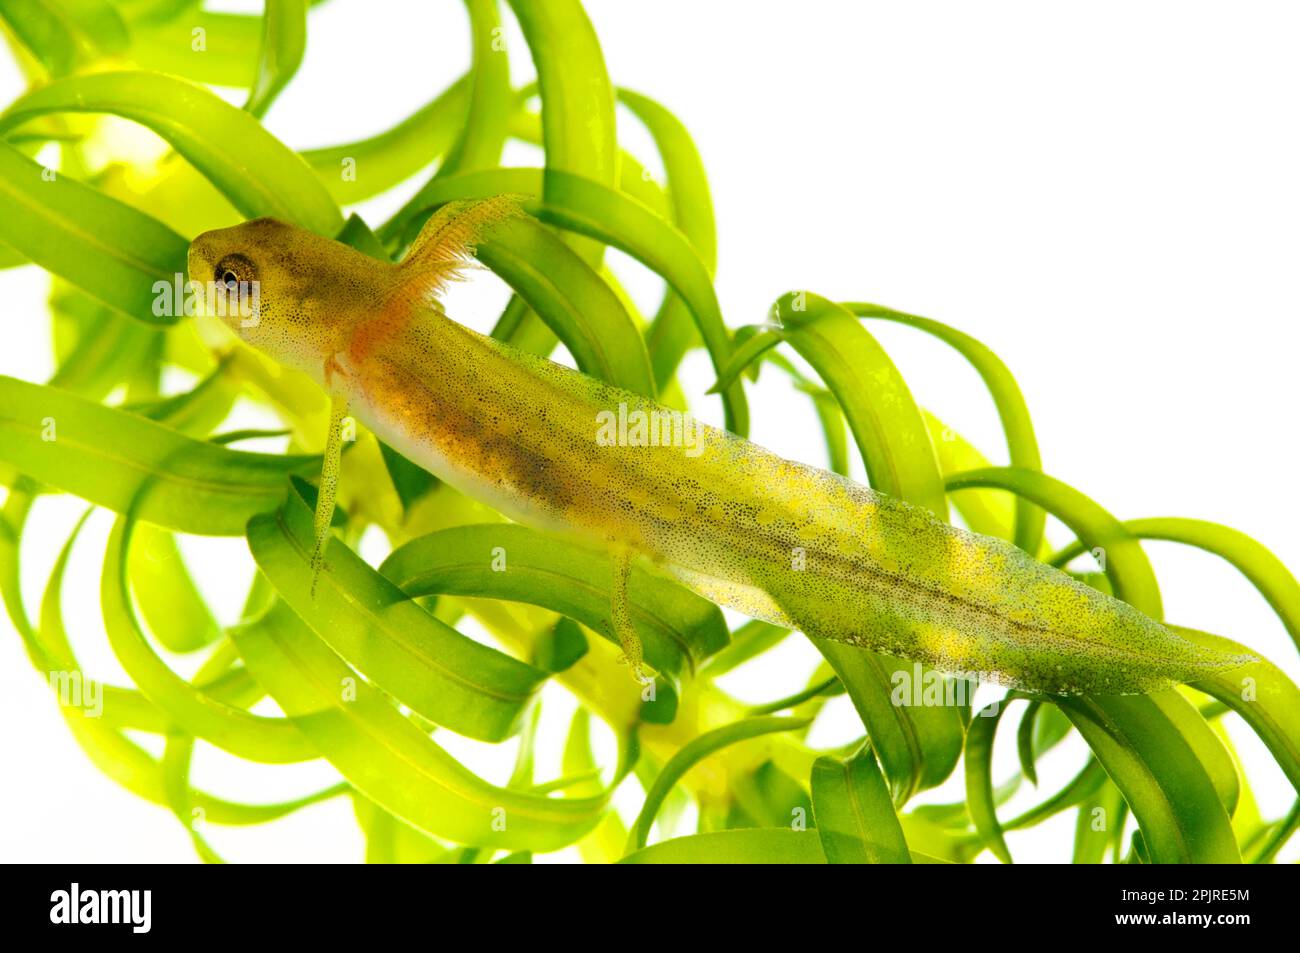 Great northern crested newt (Triturus cristatus) -larva crawling over pondweed, Wat Tyler Country Park, Essex, England, July (photographed in special Stock Photo